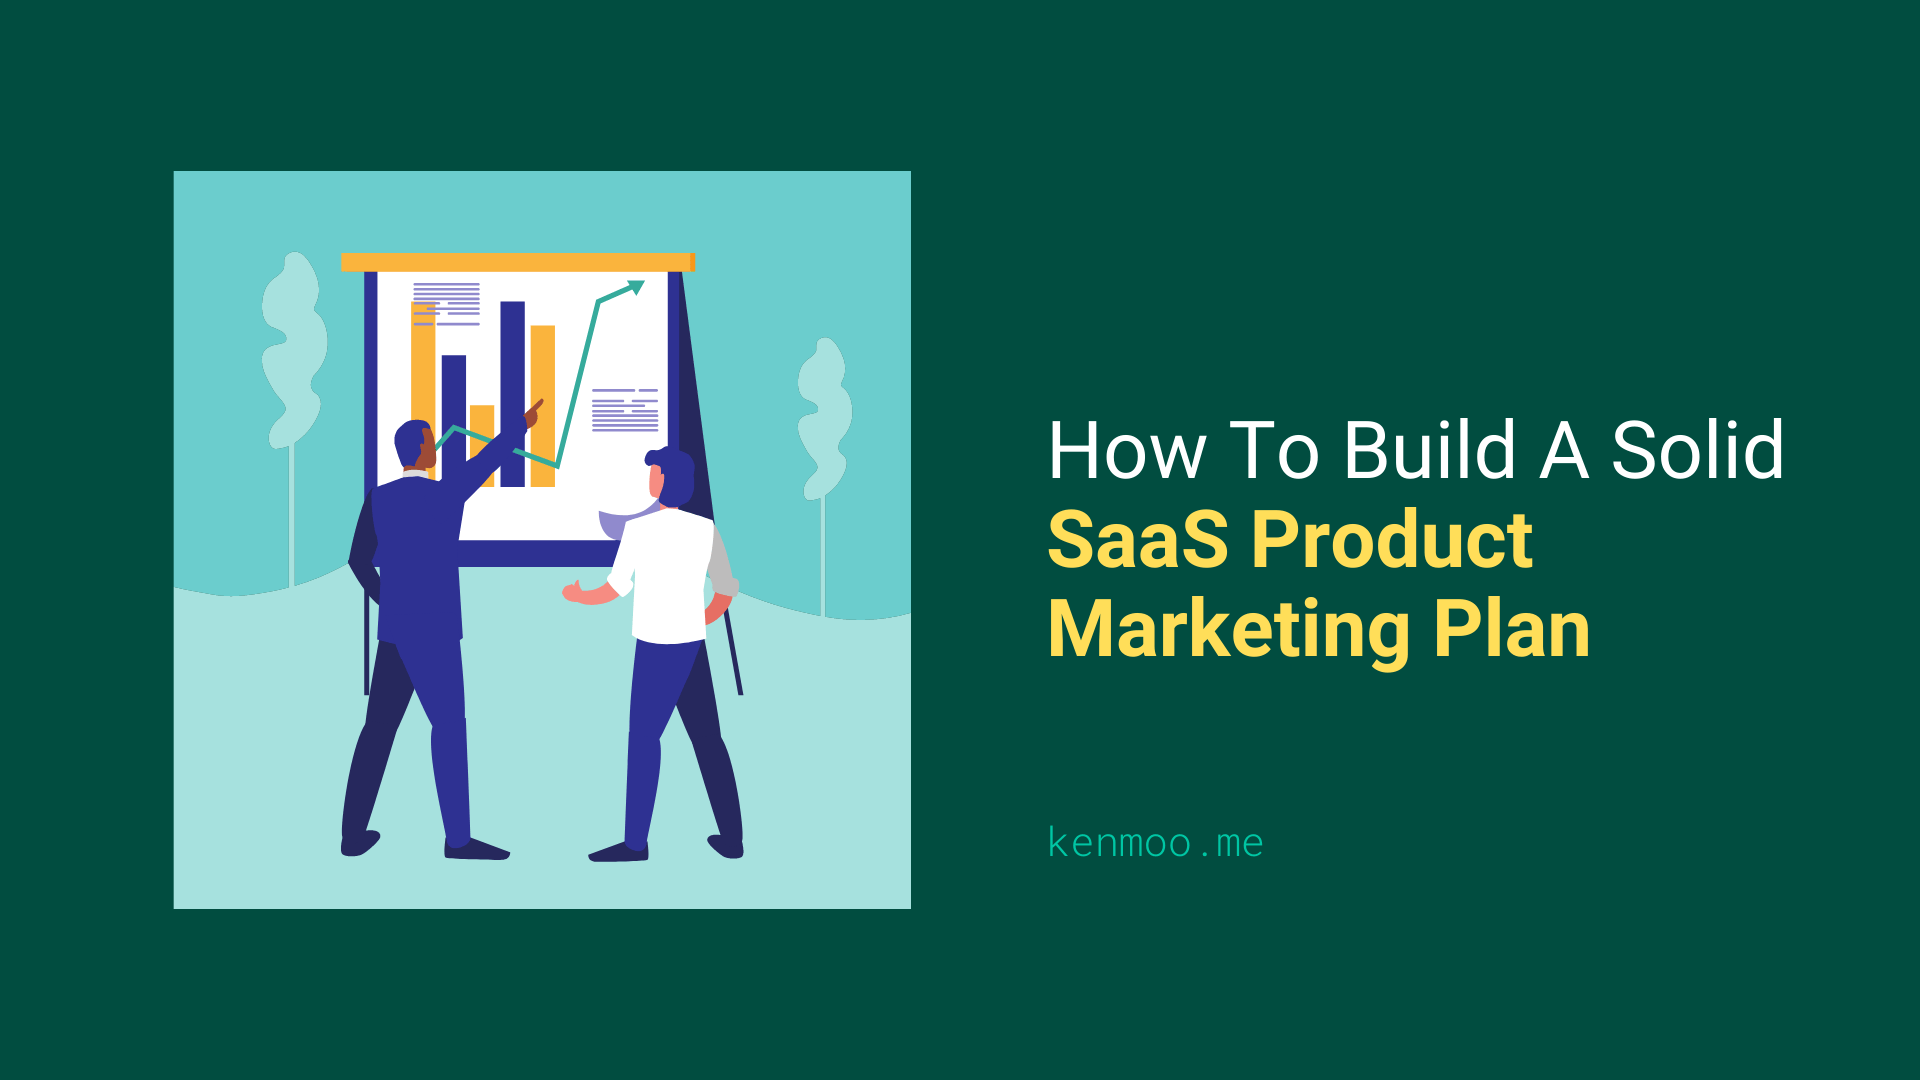 How To Build A Solid SaaS Product Marketing Plan